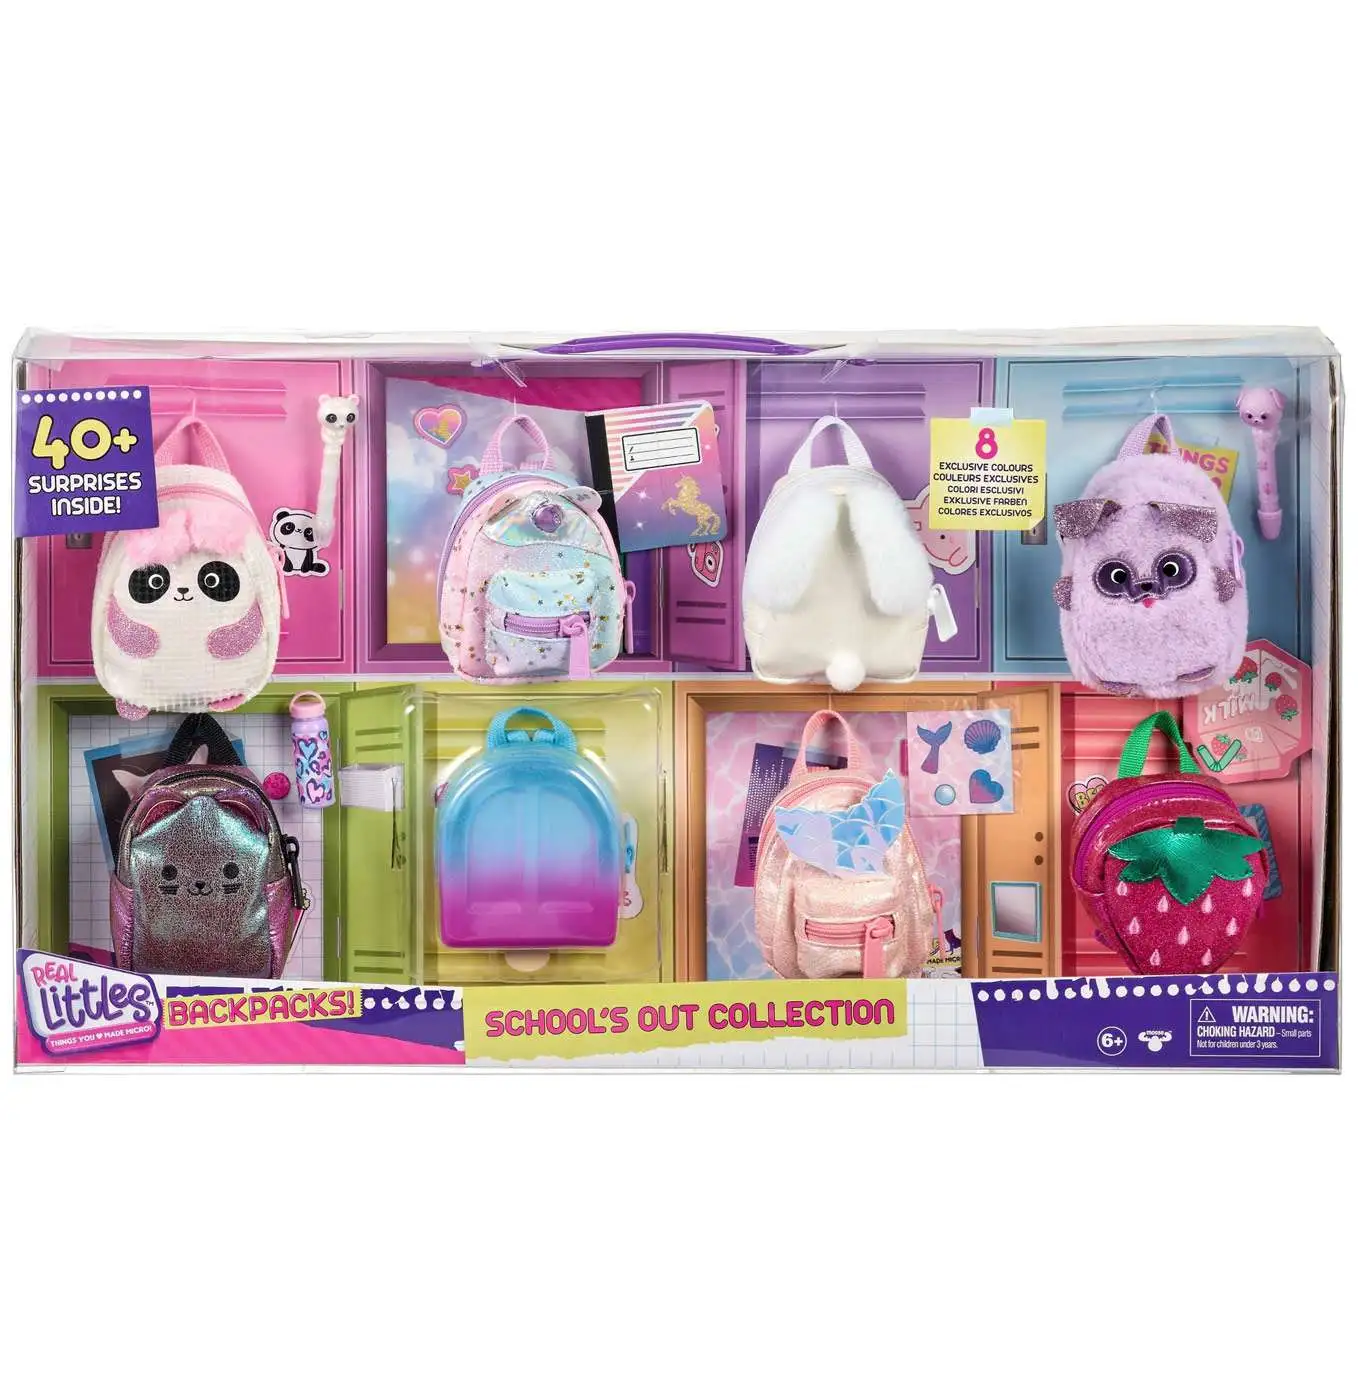 Shopkins Real Littles Toy Backpacks Exclusive Single Pack - Series 3 